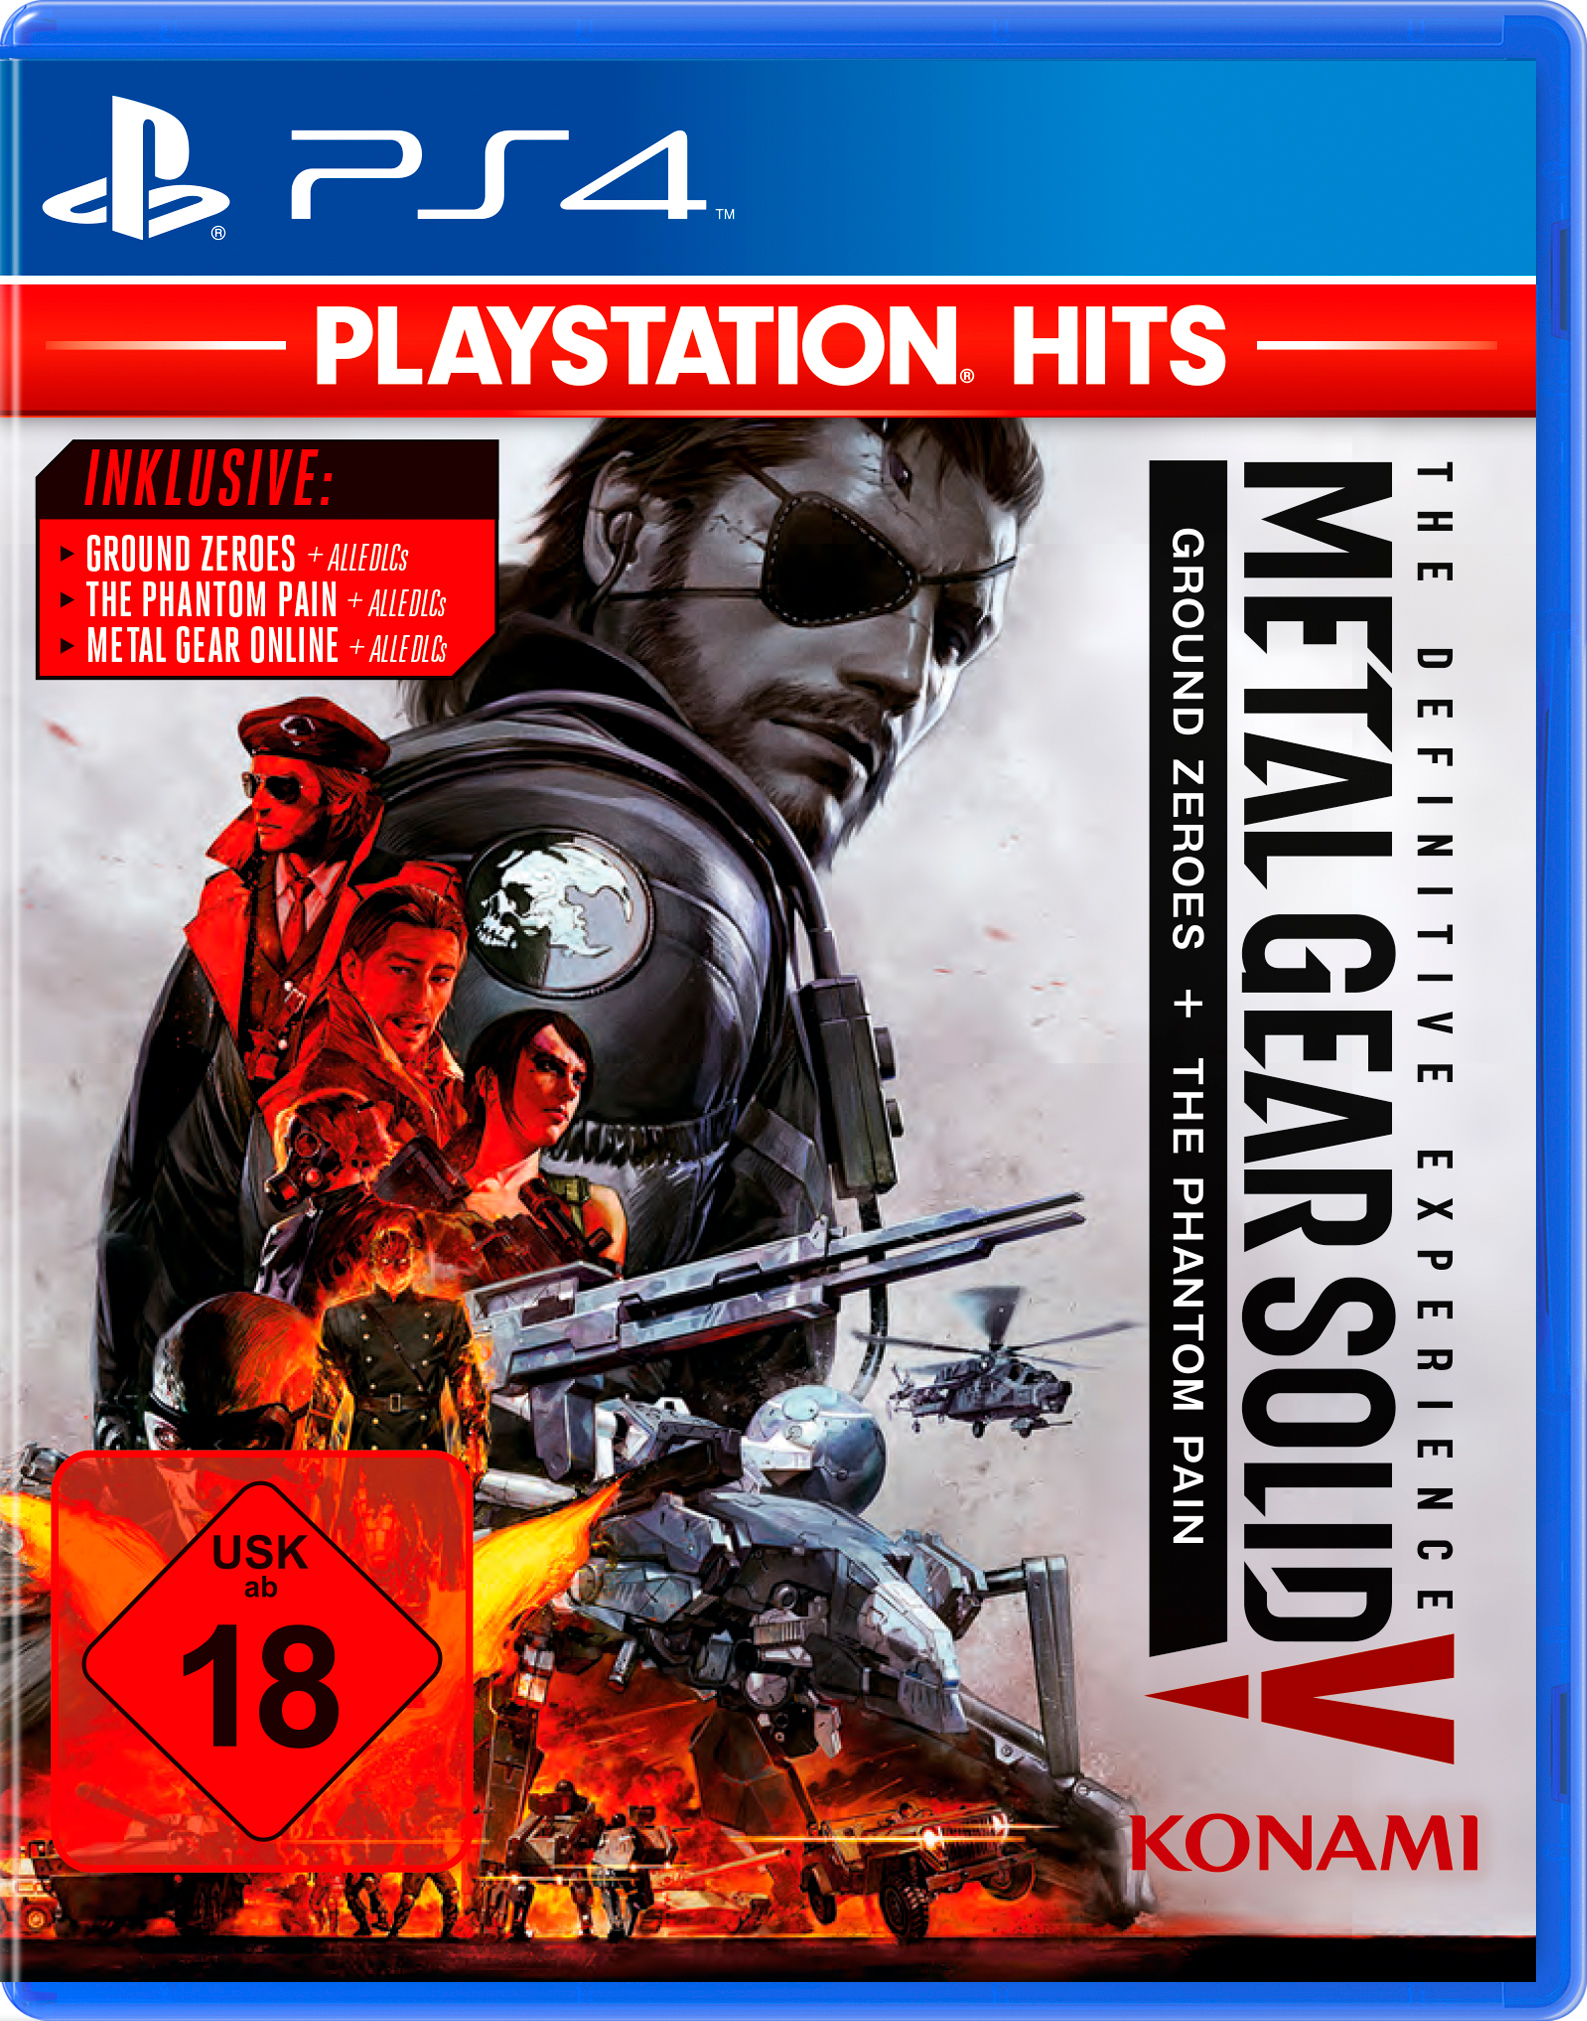 Metal Gear Solid V - The Definitive Experience